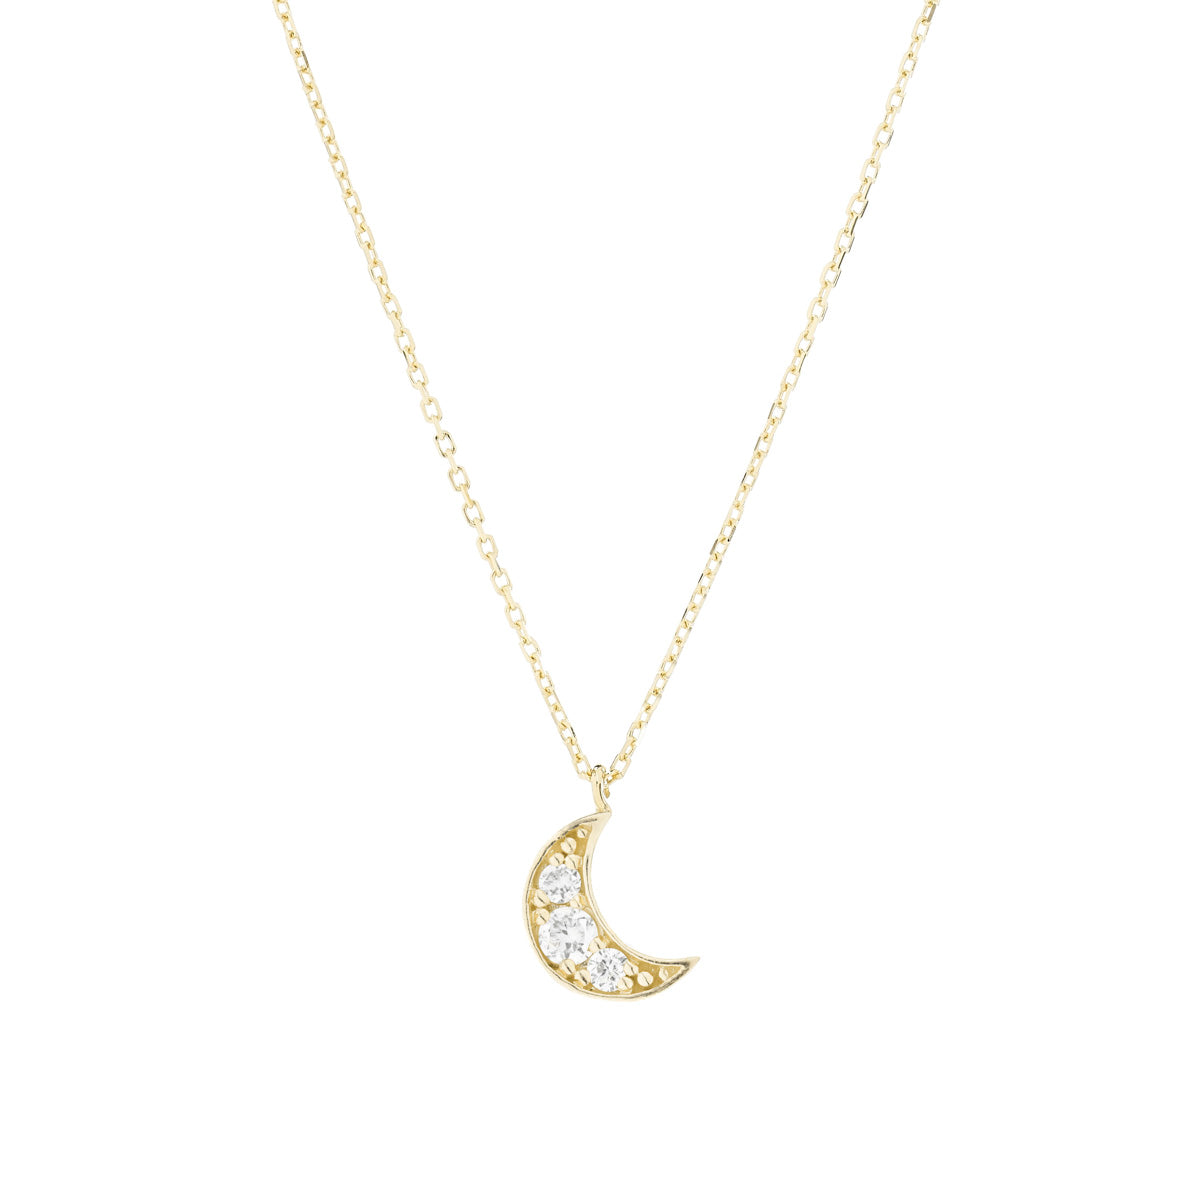 Moon necklace 18k sterling gold and diamonds